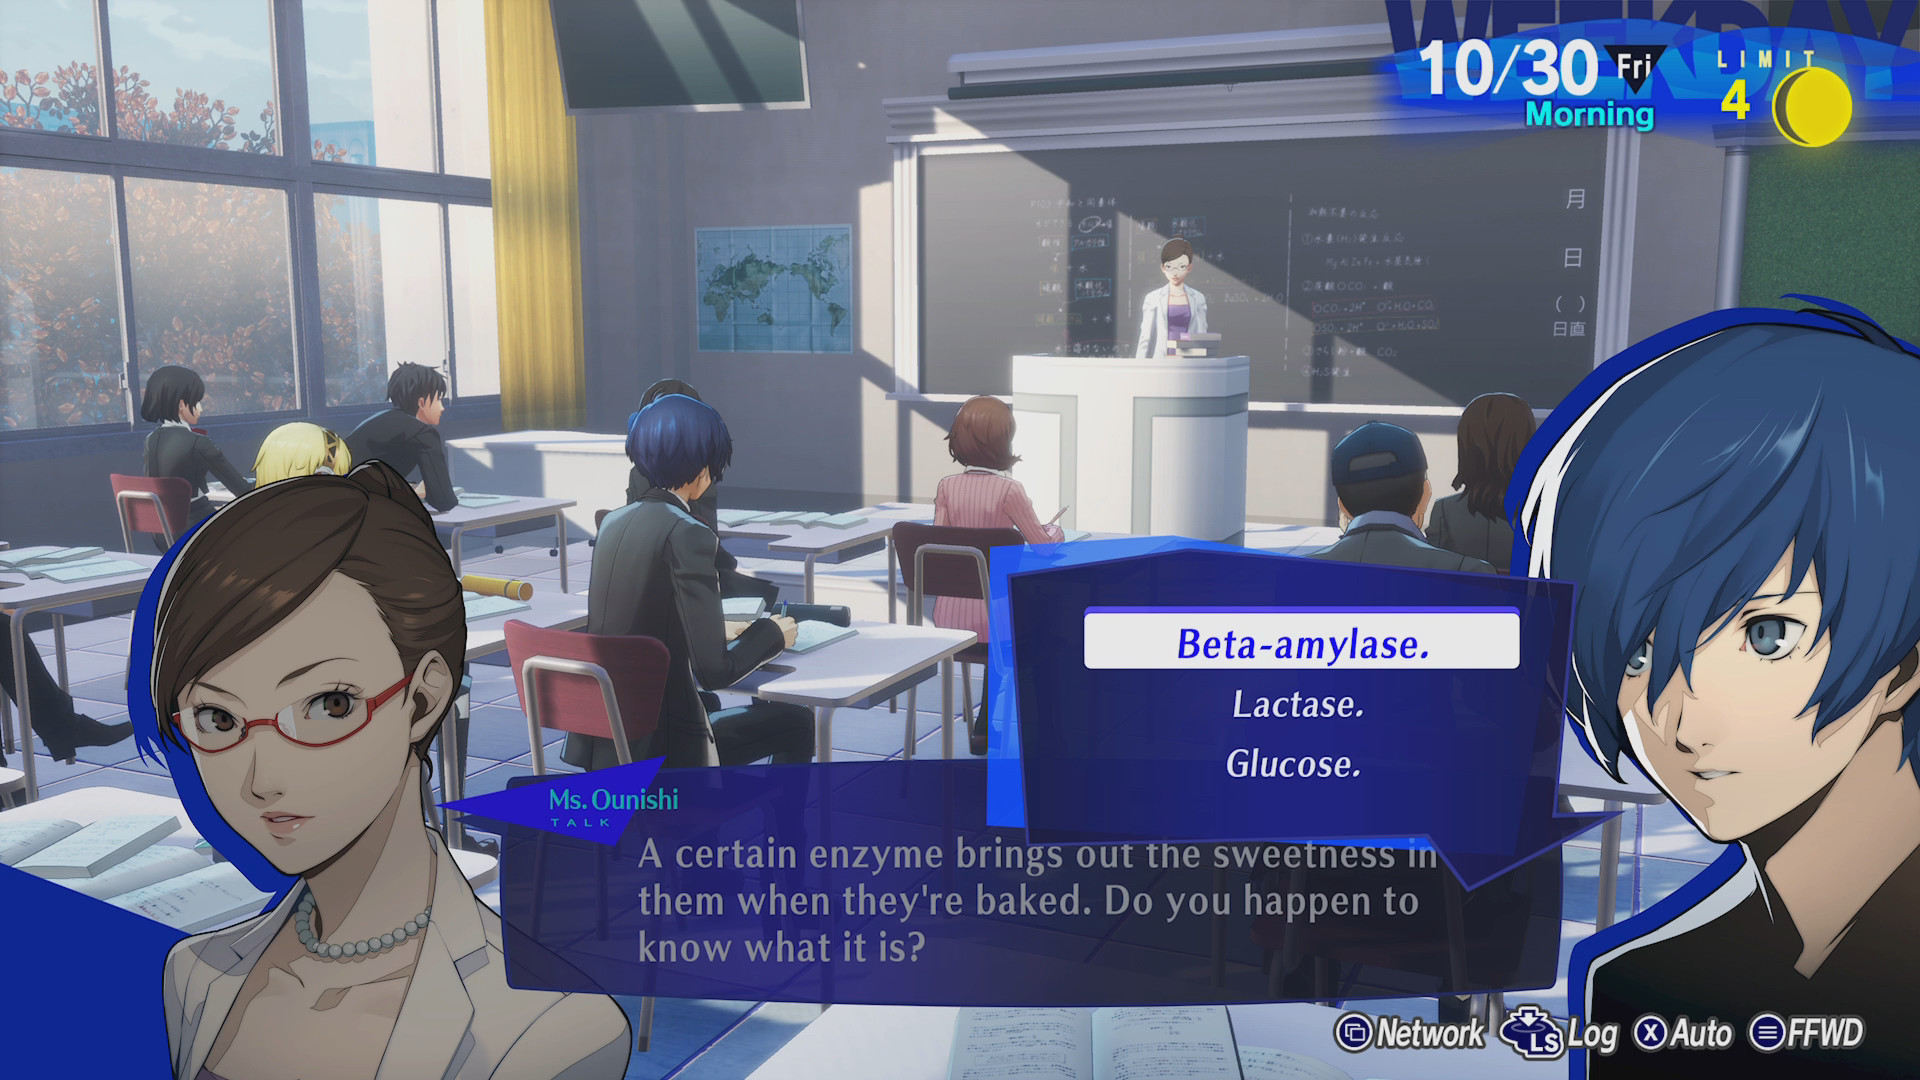 The Persona 3 Reload protagonist answers a classroom question